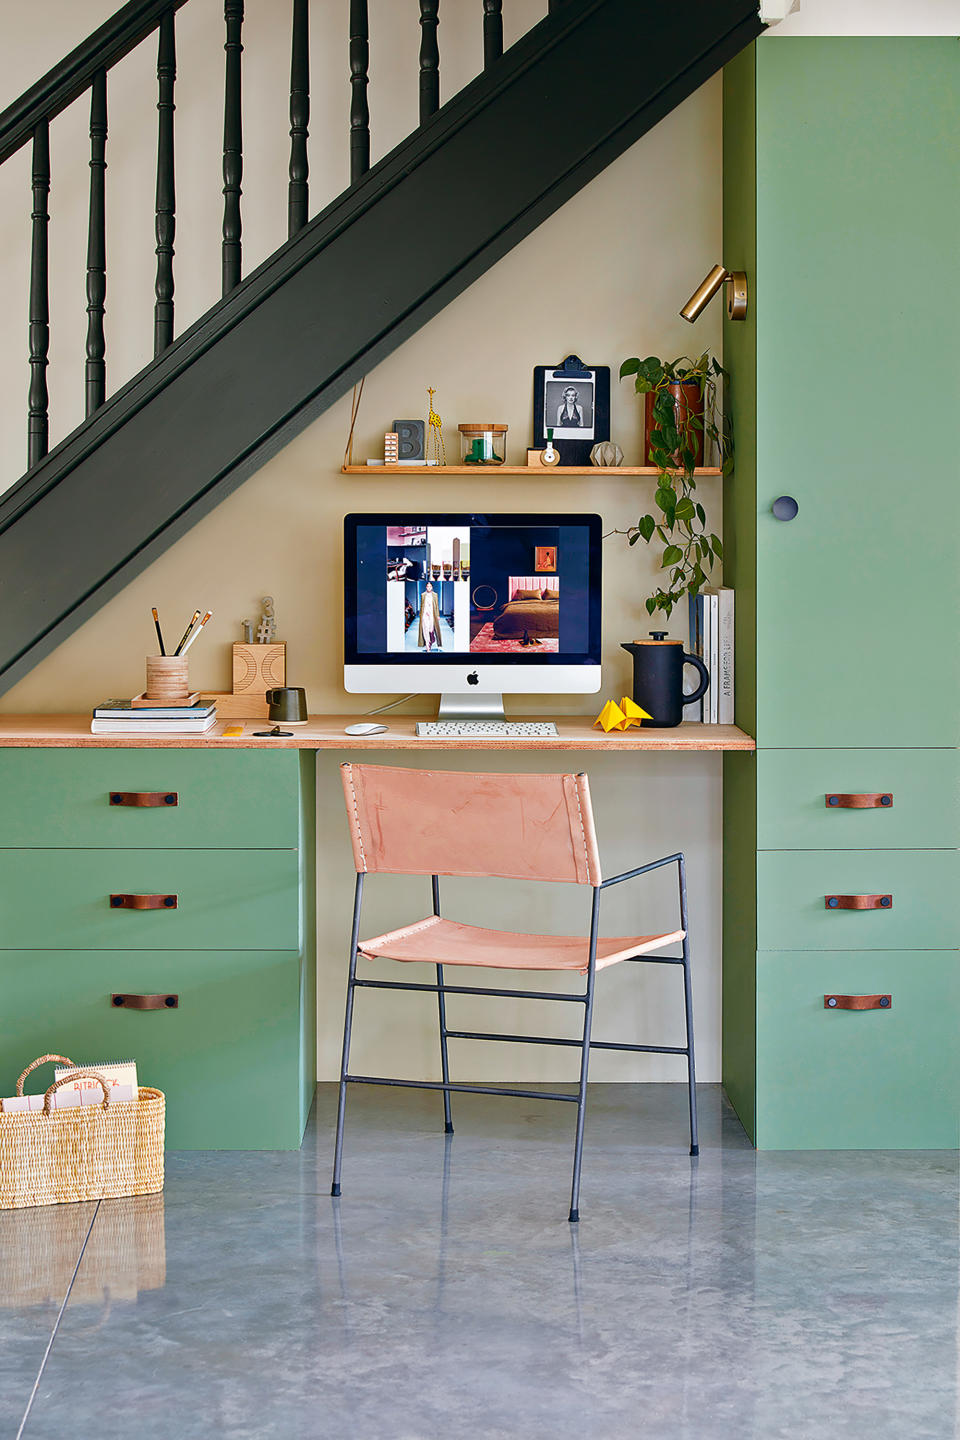 home office built in green cabinetry under the stairs with desk and laptop